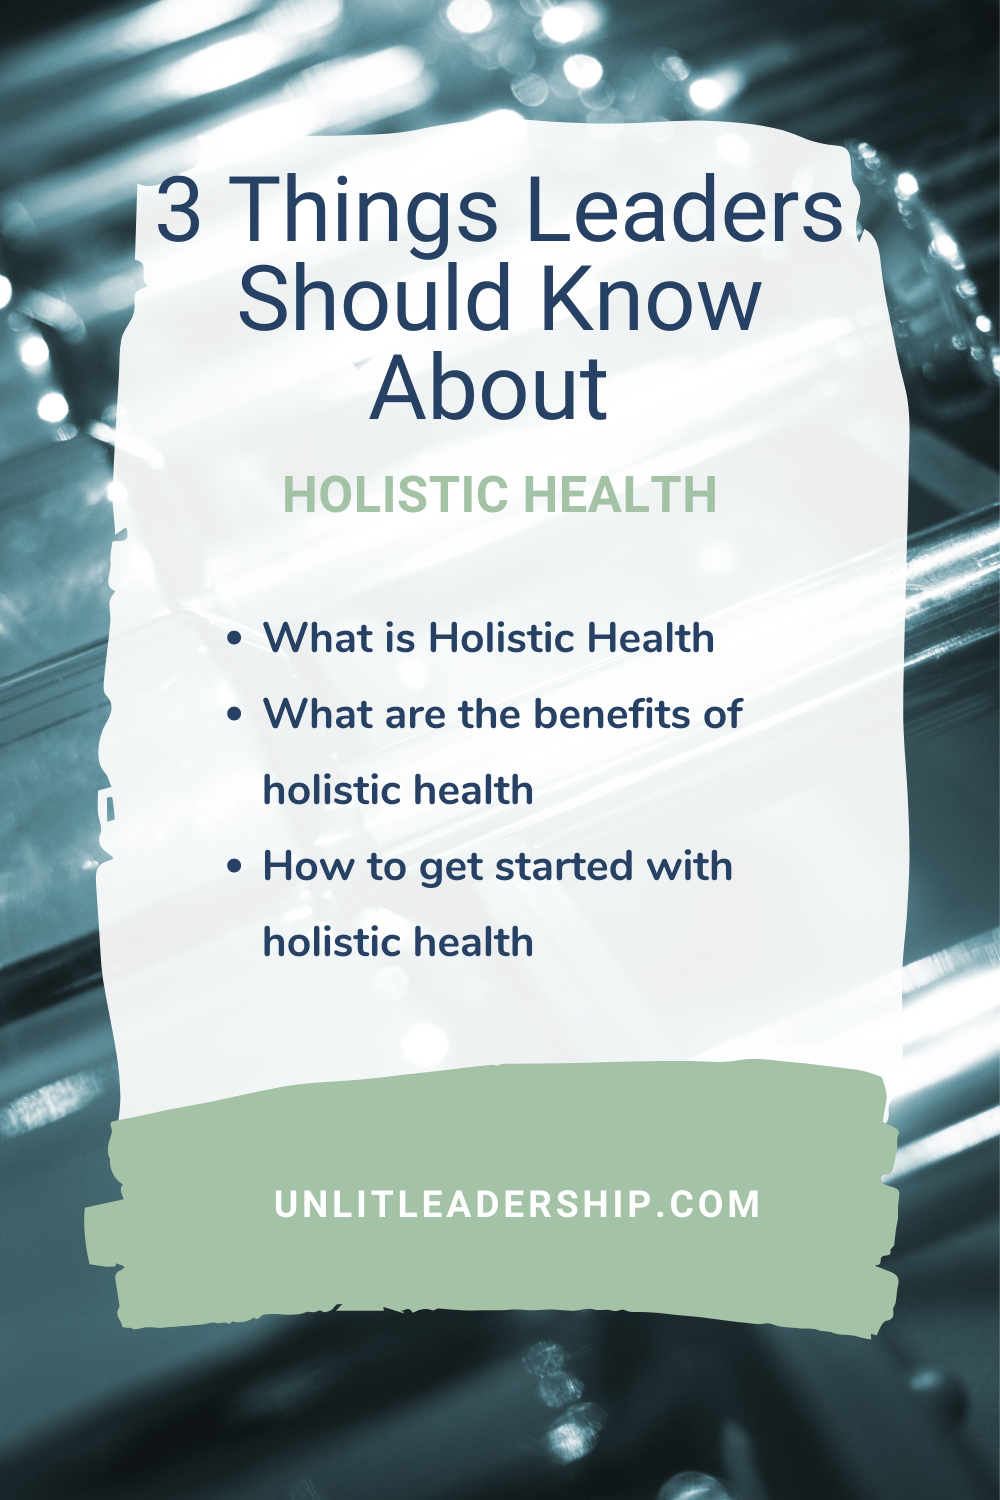 3 Things Leaders Should Know about Holistic Health